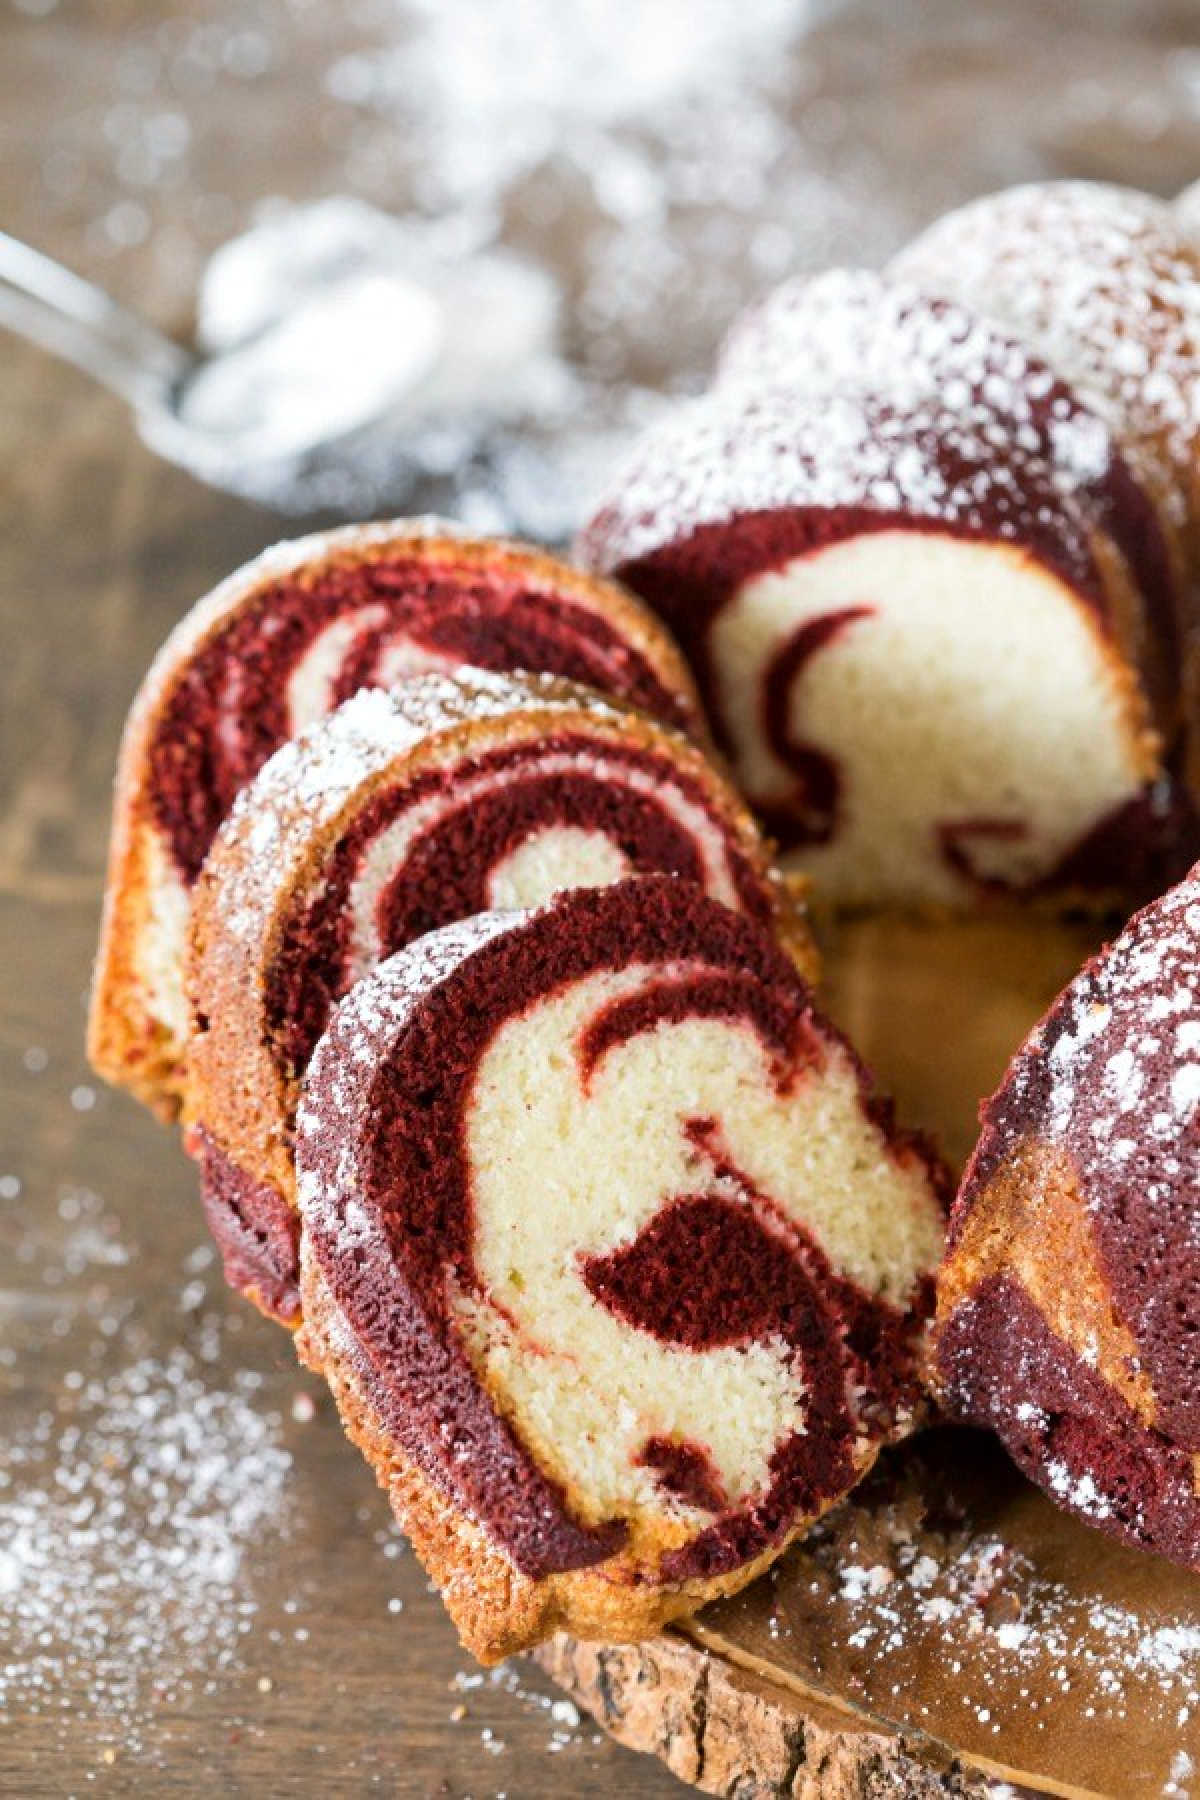 Sliced red velvet marble cake dusted with powdered sugar on a cutting board.